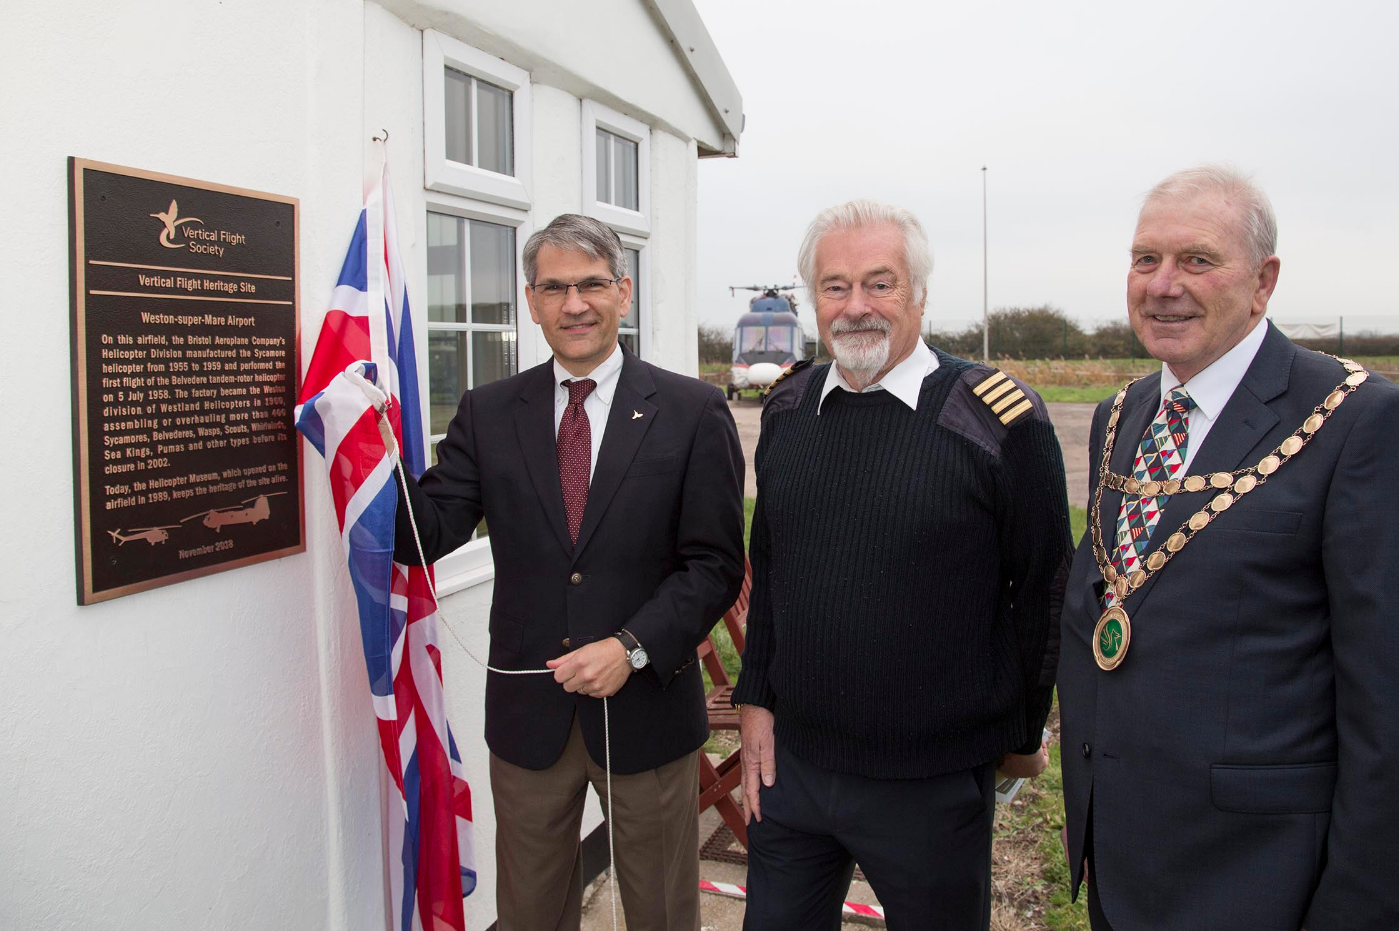 From left to right: Mike Hirschberg, VFS executive director; Elfan ap Rees, Helicopter Museum founder and chair; and David Jolley, chairman of North Somerset Council. VFS Photo